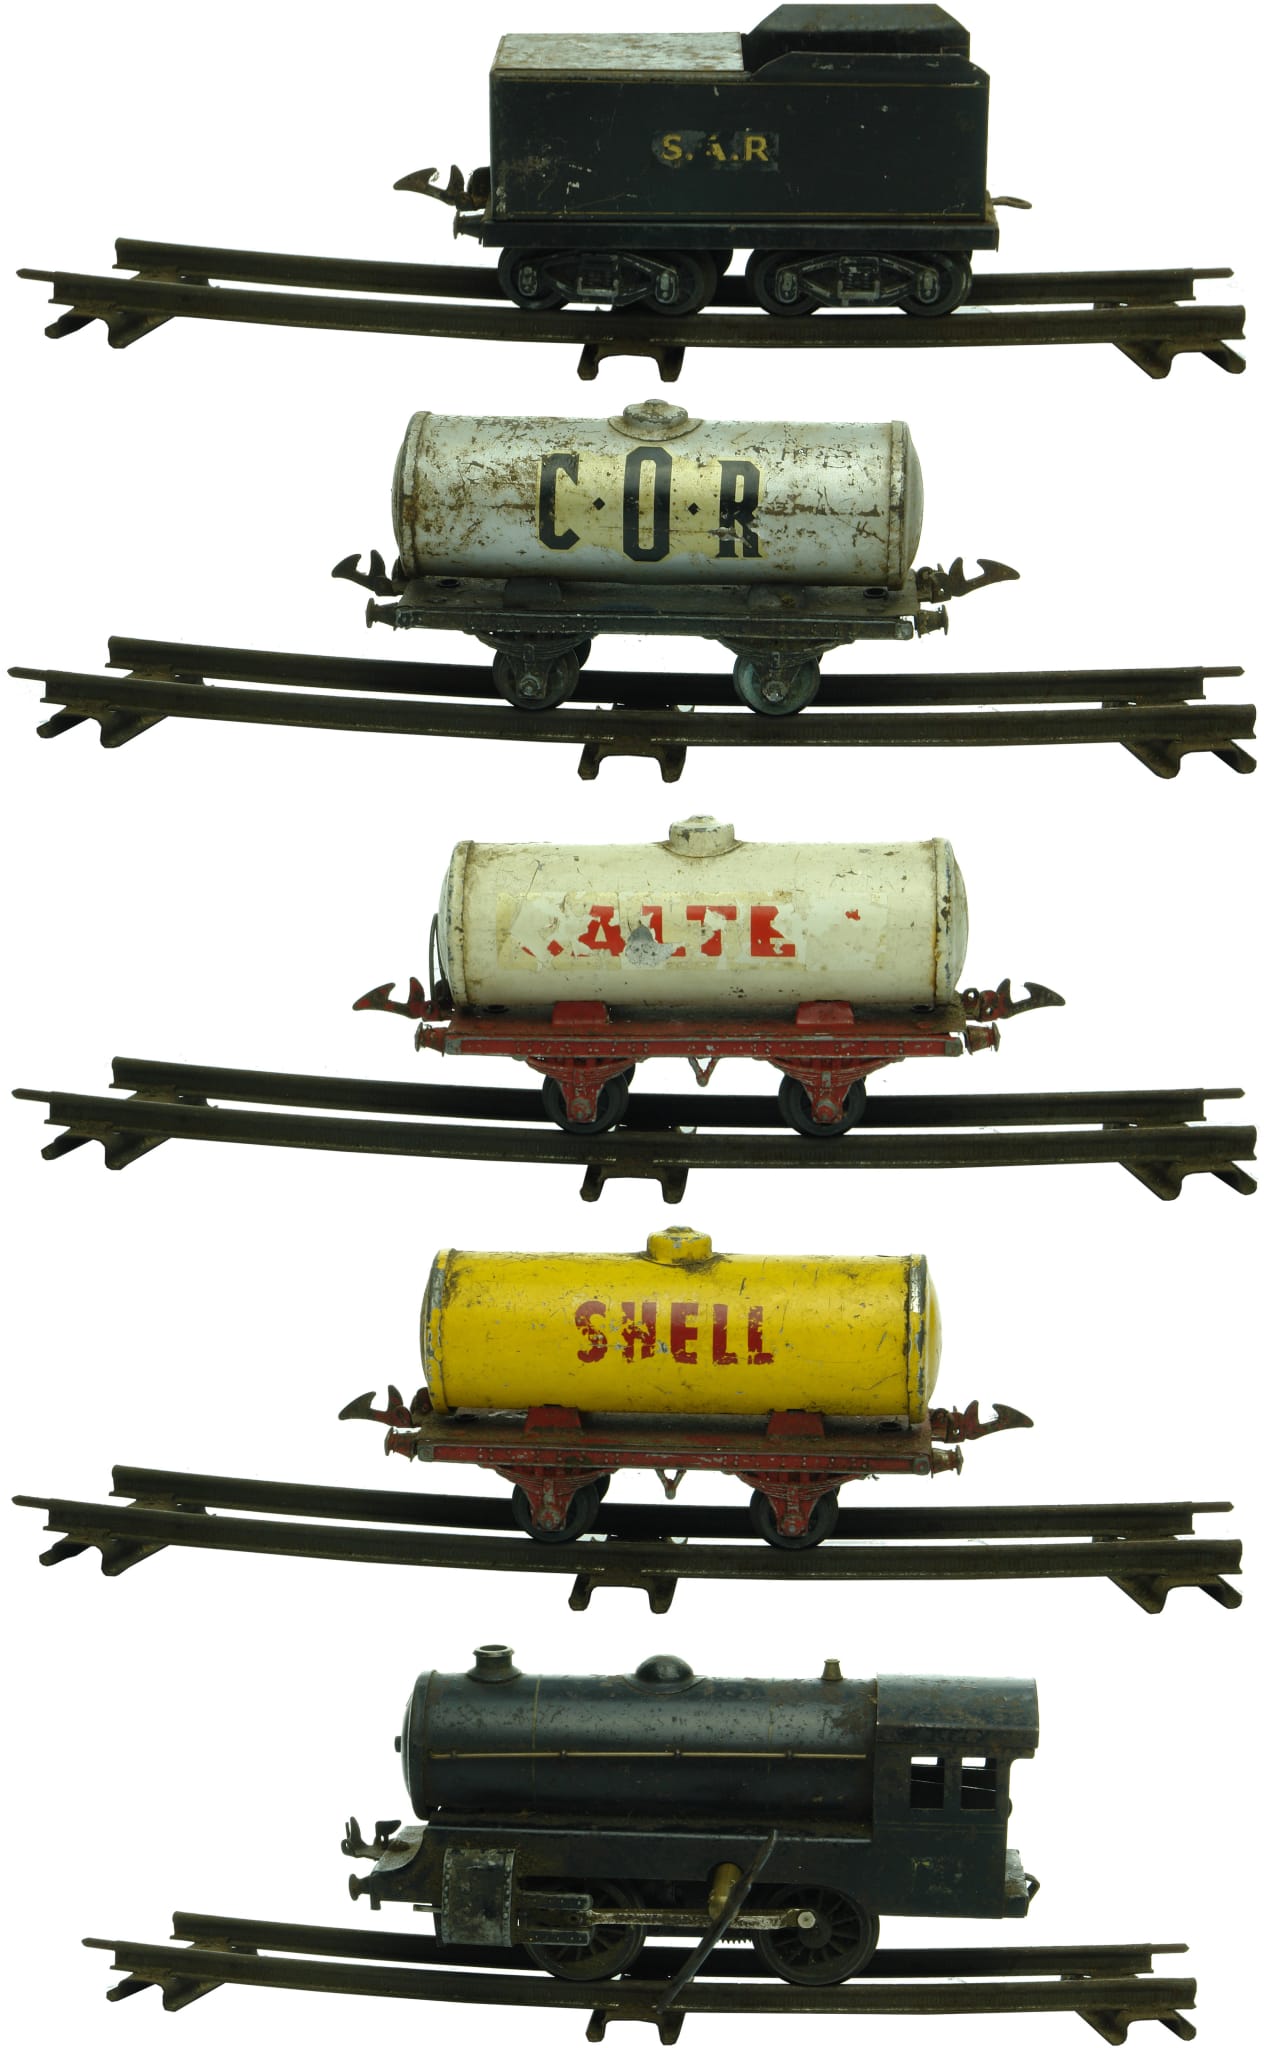 Robilt Locomotive Petrol Related Carriages Toy Trains